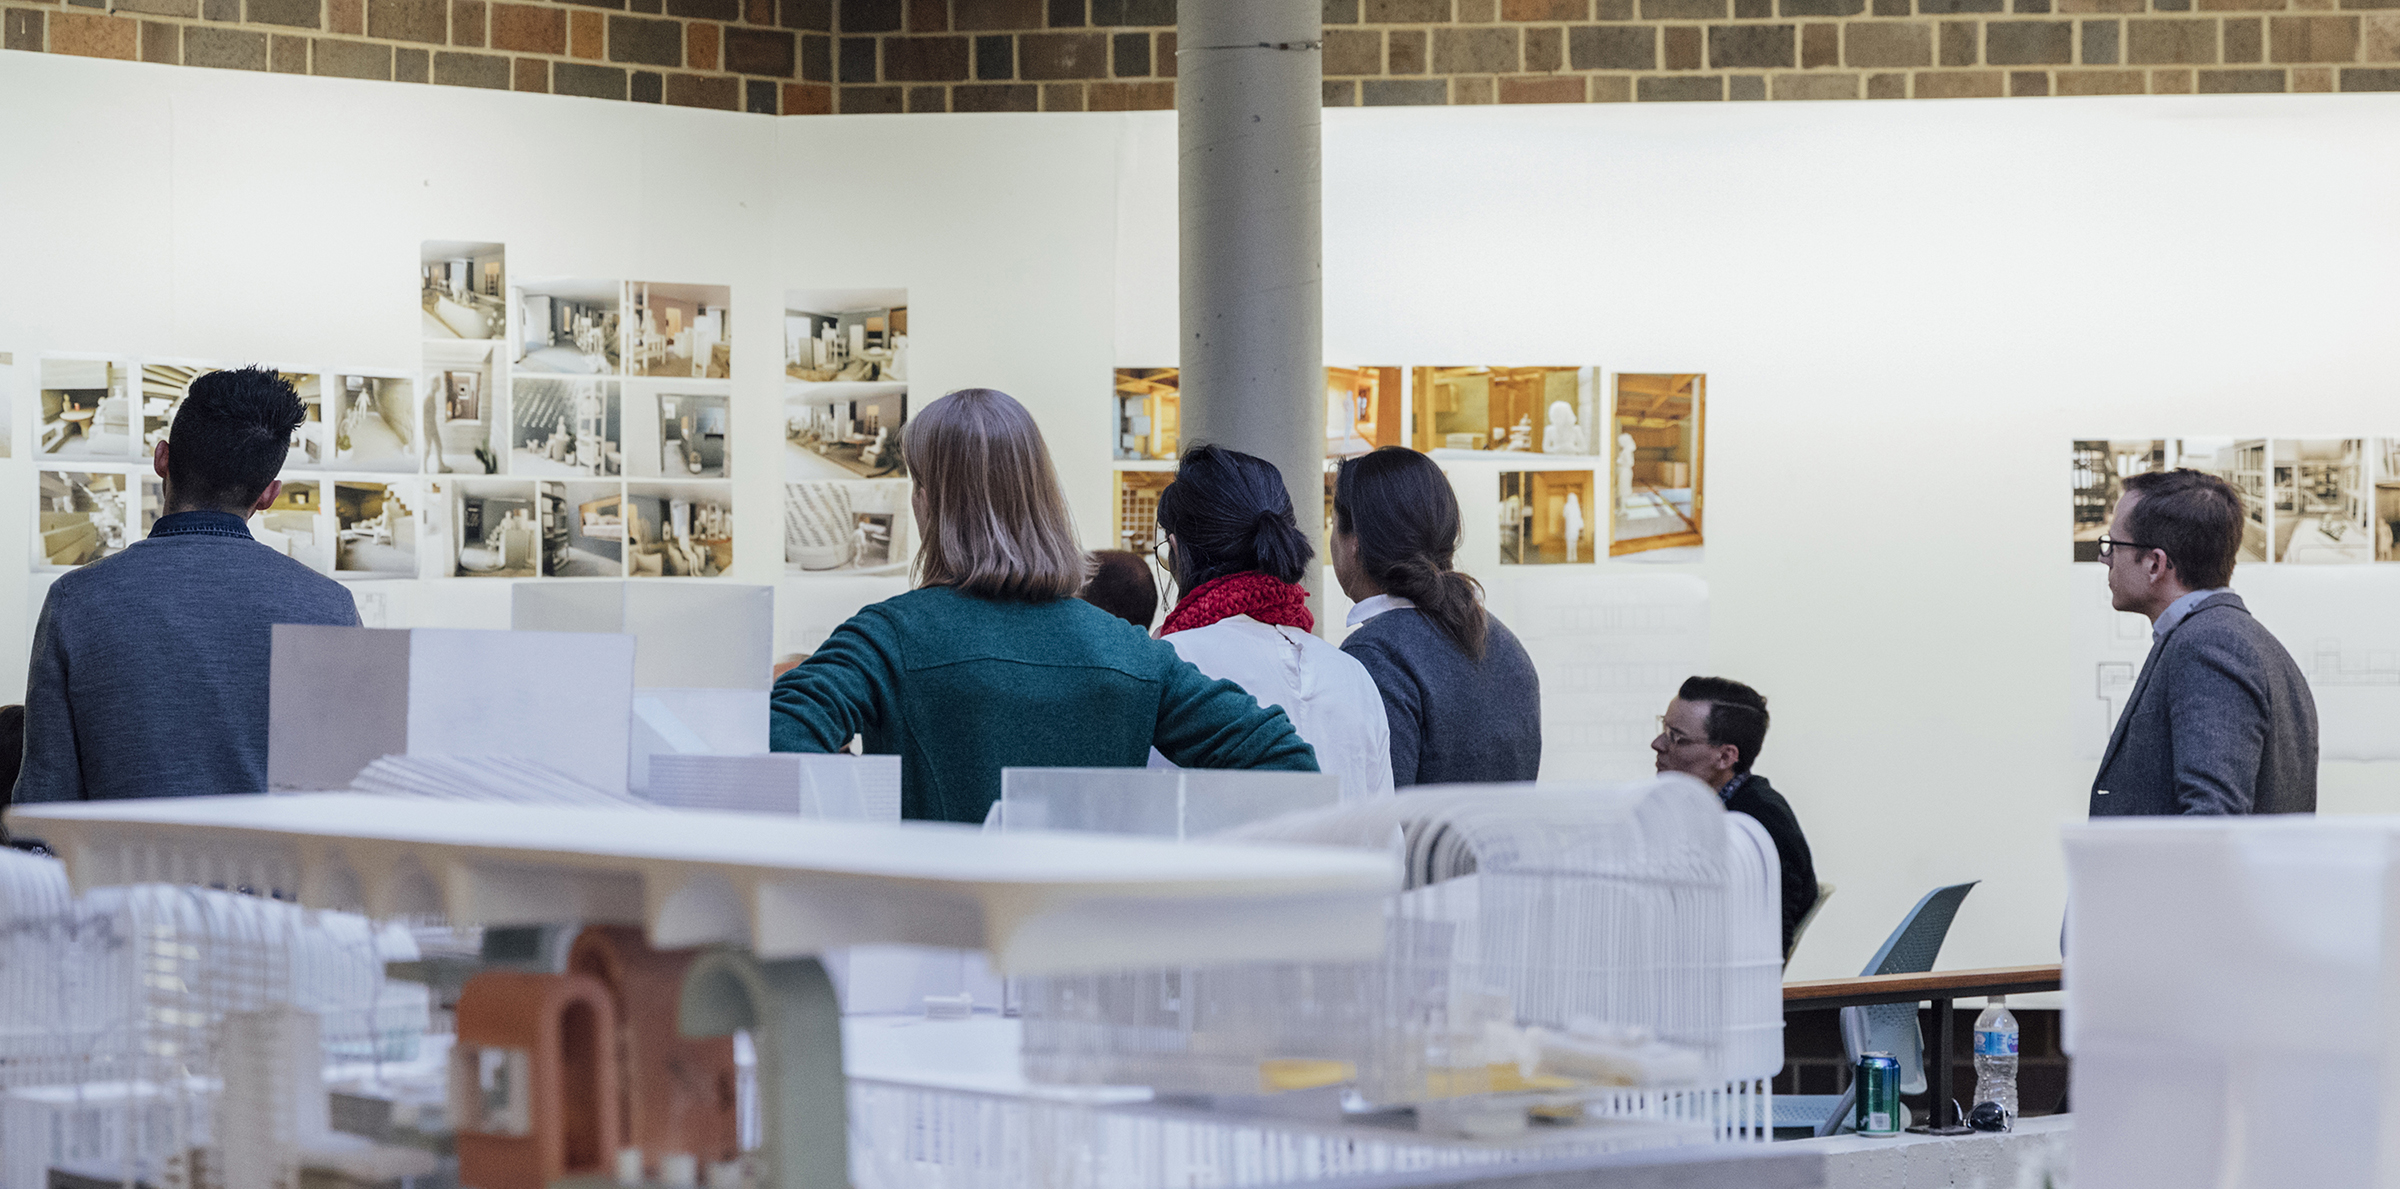 School of Architecture final reviews, December 2018